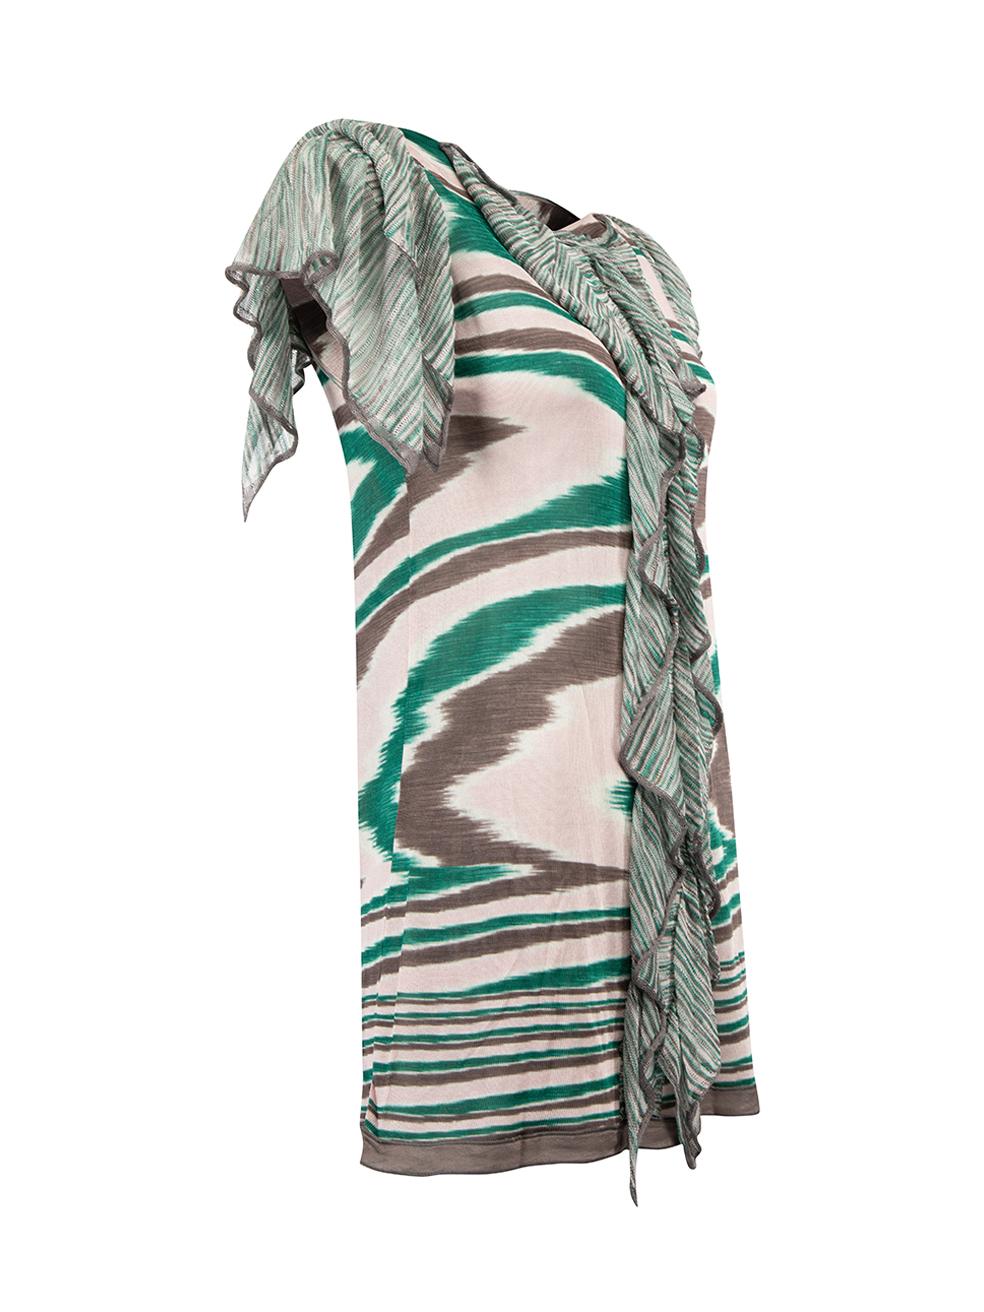 CONDITION is Very good. Minimal wear to top is evident. There is a small stain near the bottom of dress around the right side seam on this used Missoni designer resale item. 
 
 Details
  Multicolour- Green, pink and brown
 Viscose
 Light weight